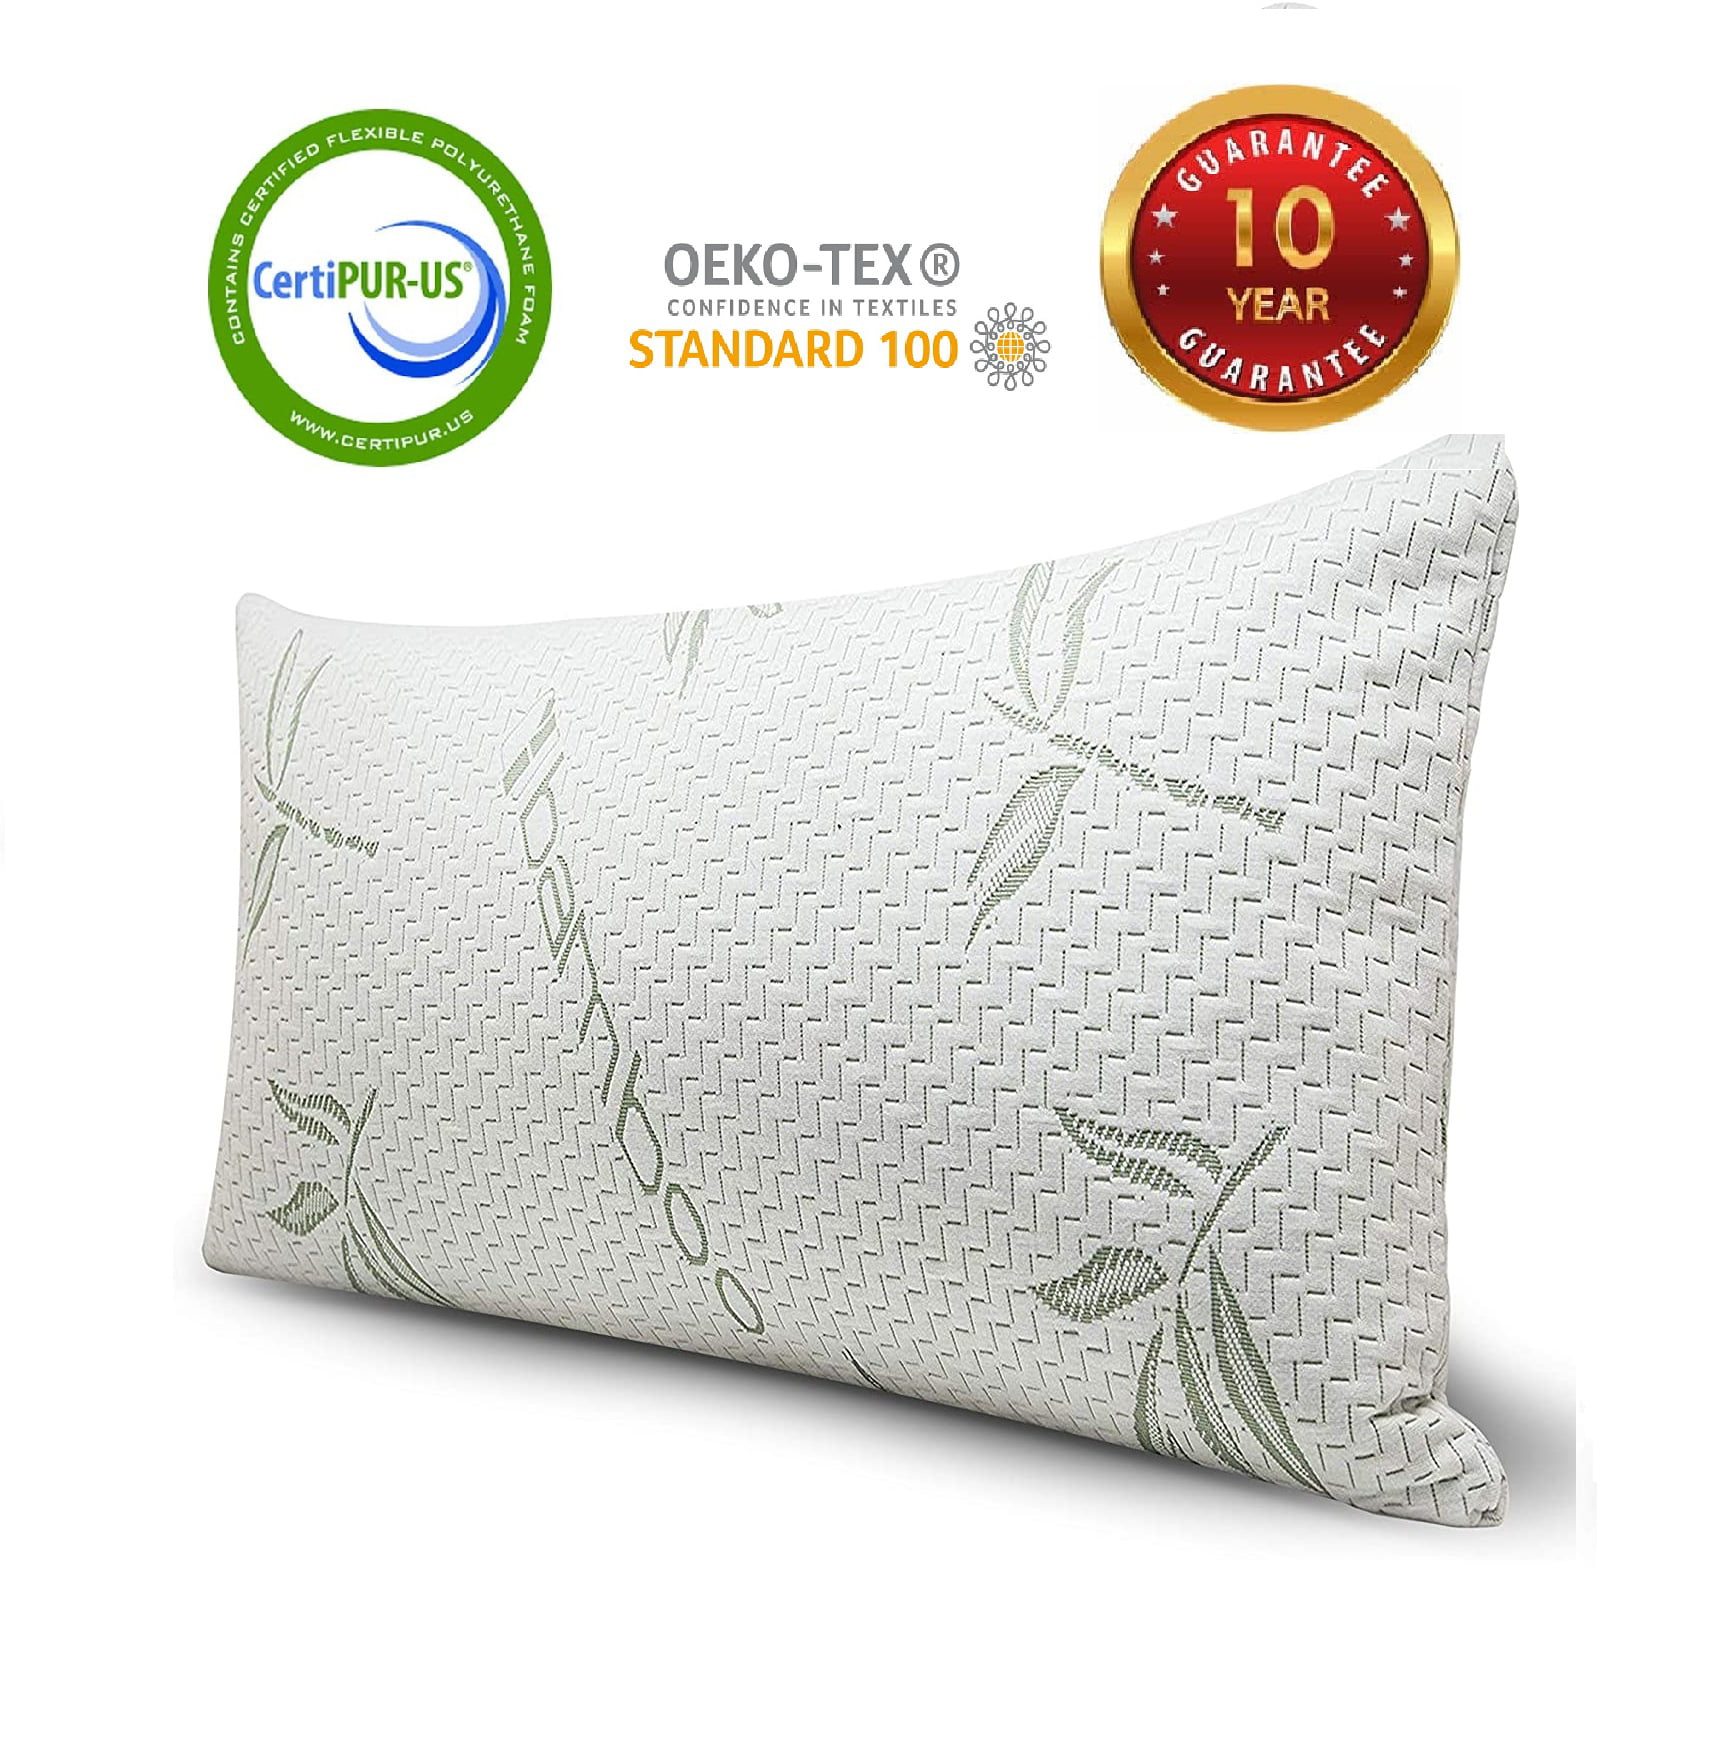 Cool Home Goods Queen Size Bamboo Pillow Shredded Memory Foam Adjustable Pillow With Hypoallergenic Antibacterial Removable Washable Bamboo Rayon Zipper Cover 1 Pack Queen Walmart Com Walmart Com